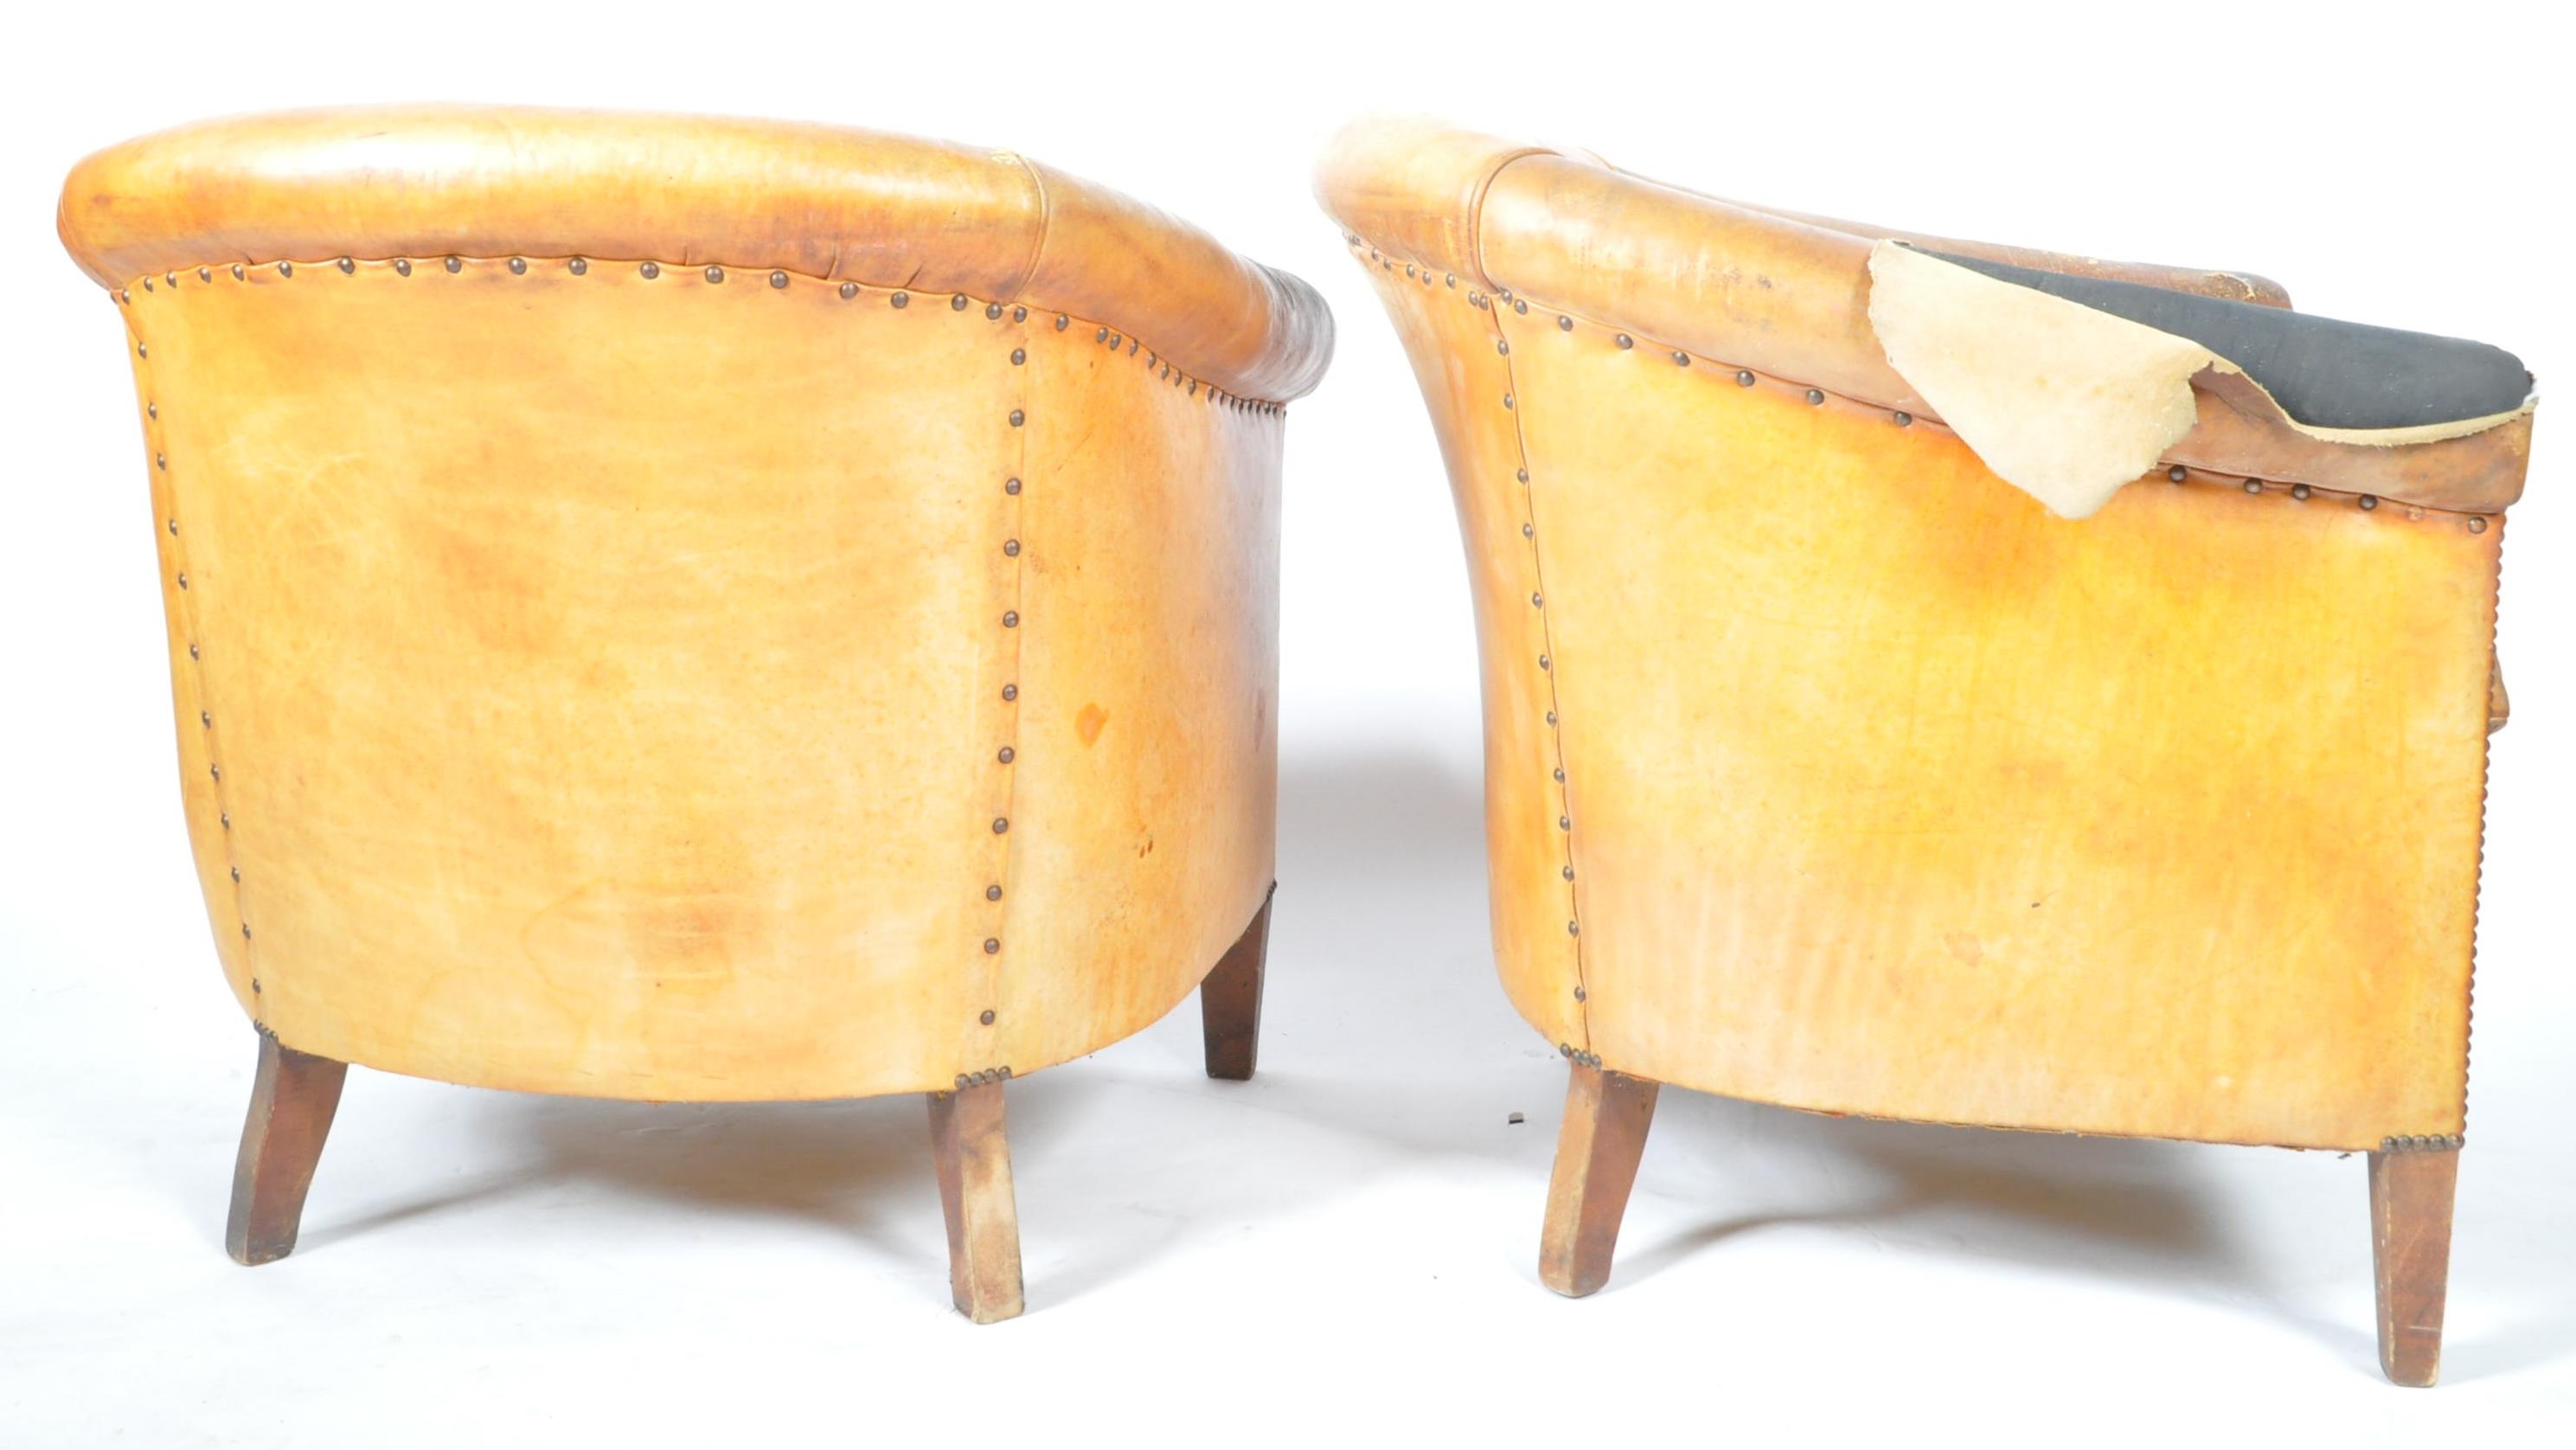 PAIR OF DUTCH SHEEPSKIN TAN BROWN LEATHER CLUB ARMCHAIRS - Image 8 of 8